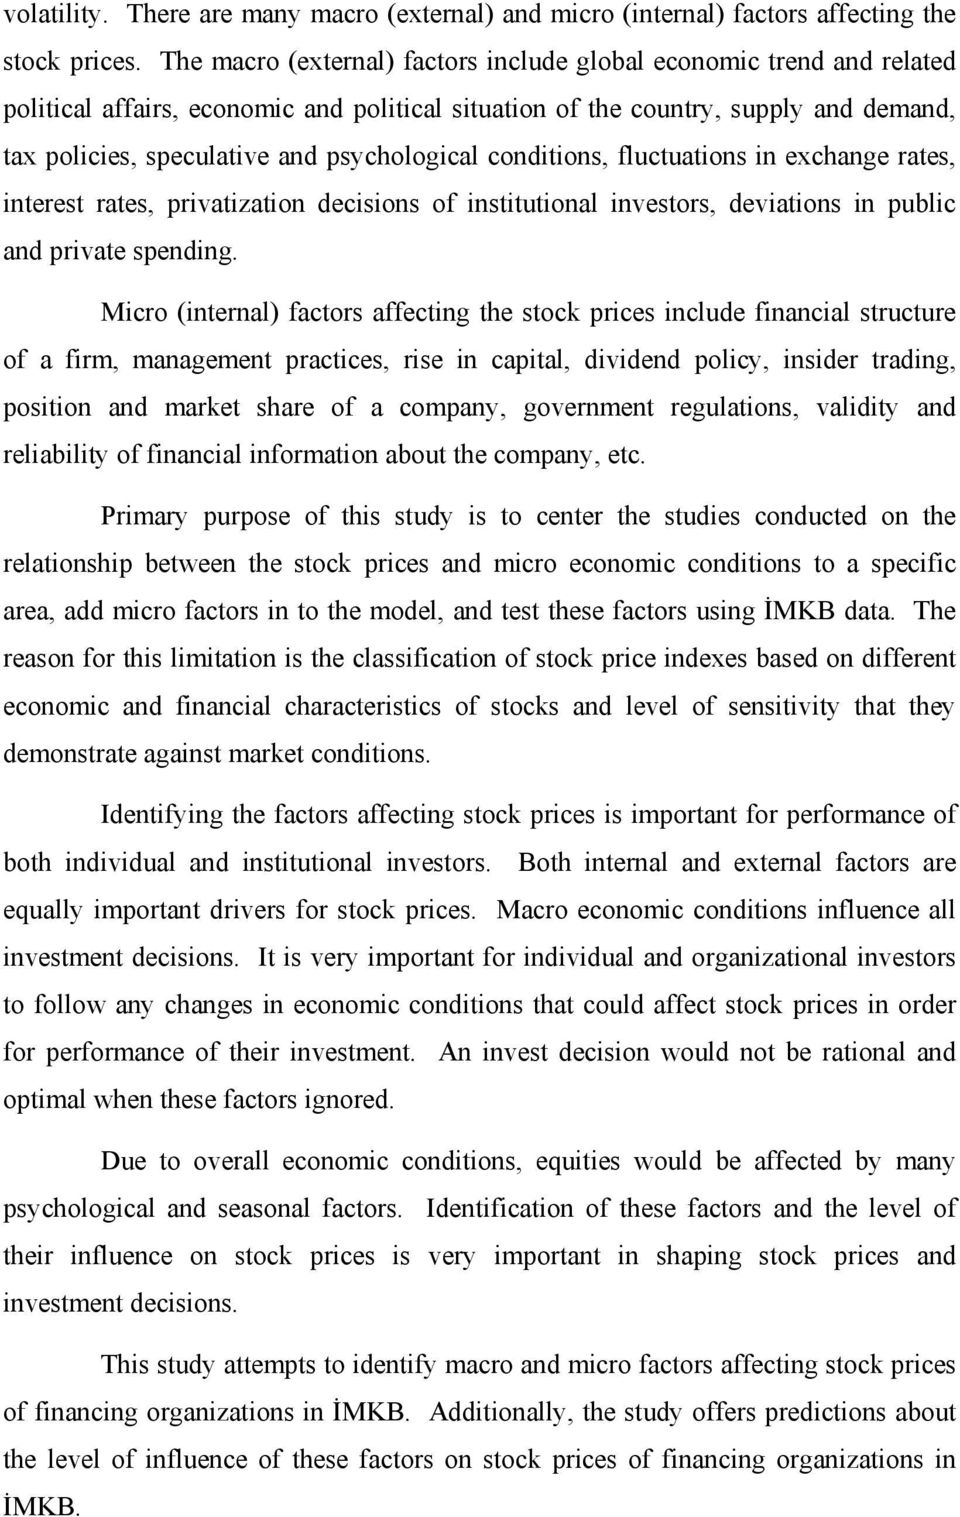 psychological conditions, fluctuations in exchange rates, interest rates, privatization decisions of institutional investors, deviations in public and private spending.